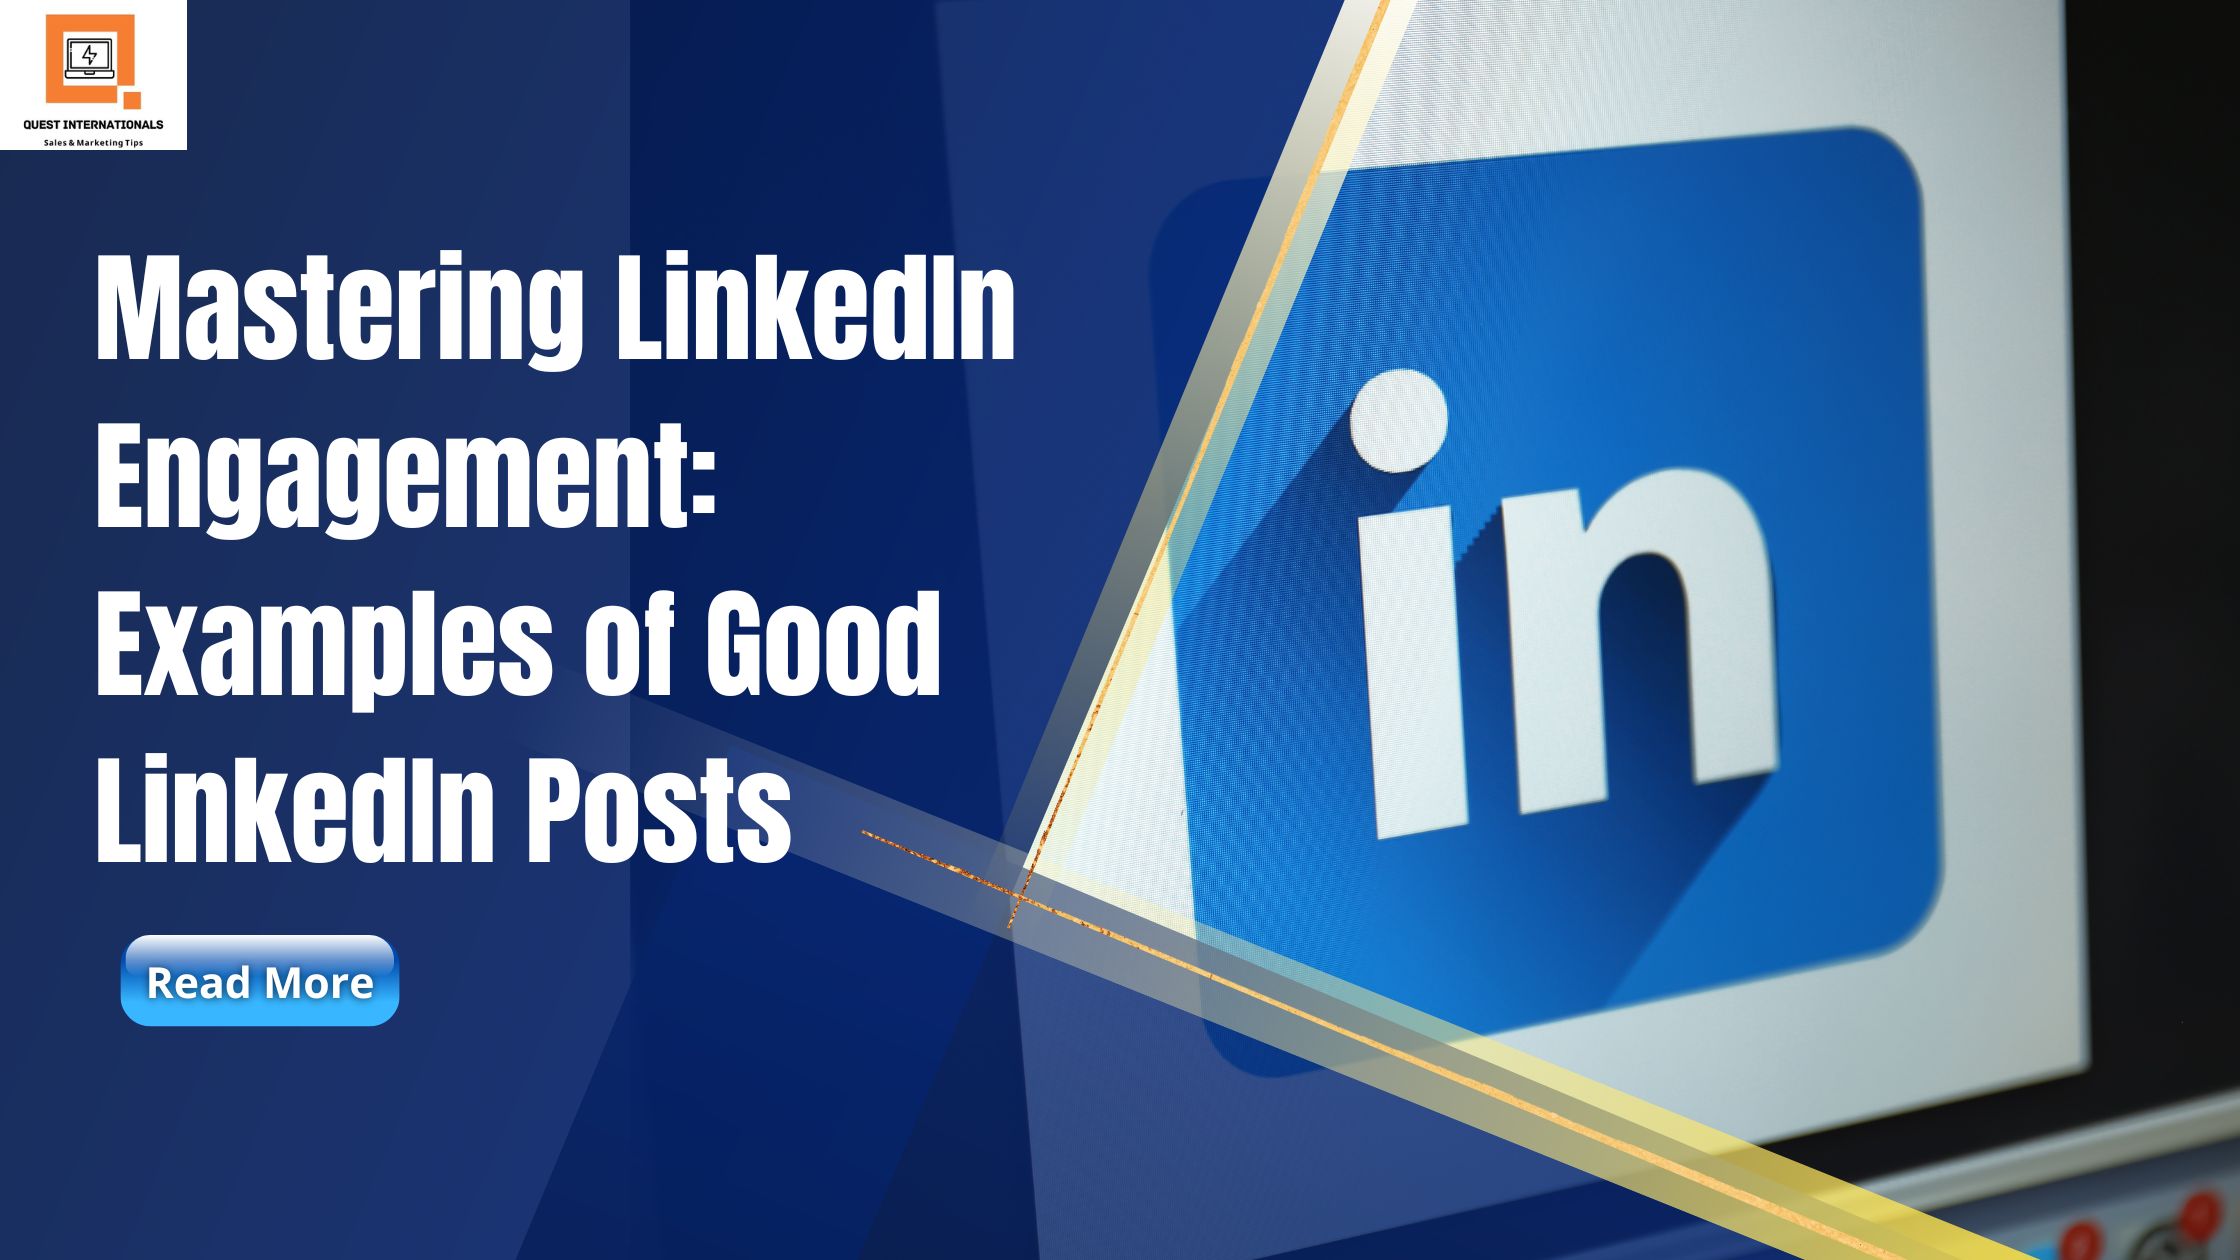 You are currently viewing Mastering LinkedIn Engagement: Examples of Good LinkedIn Posts